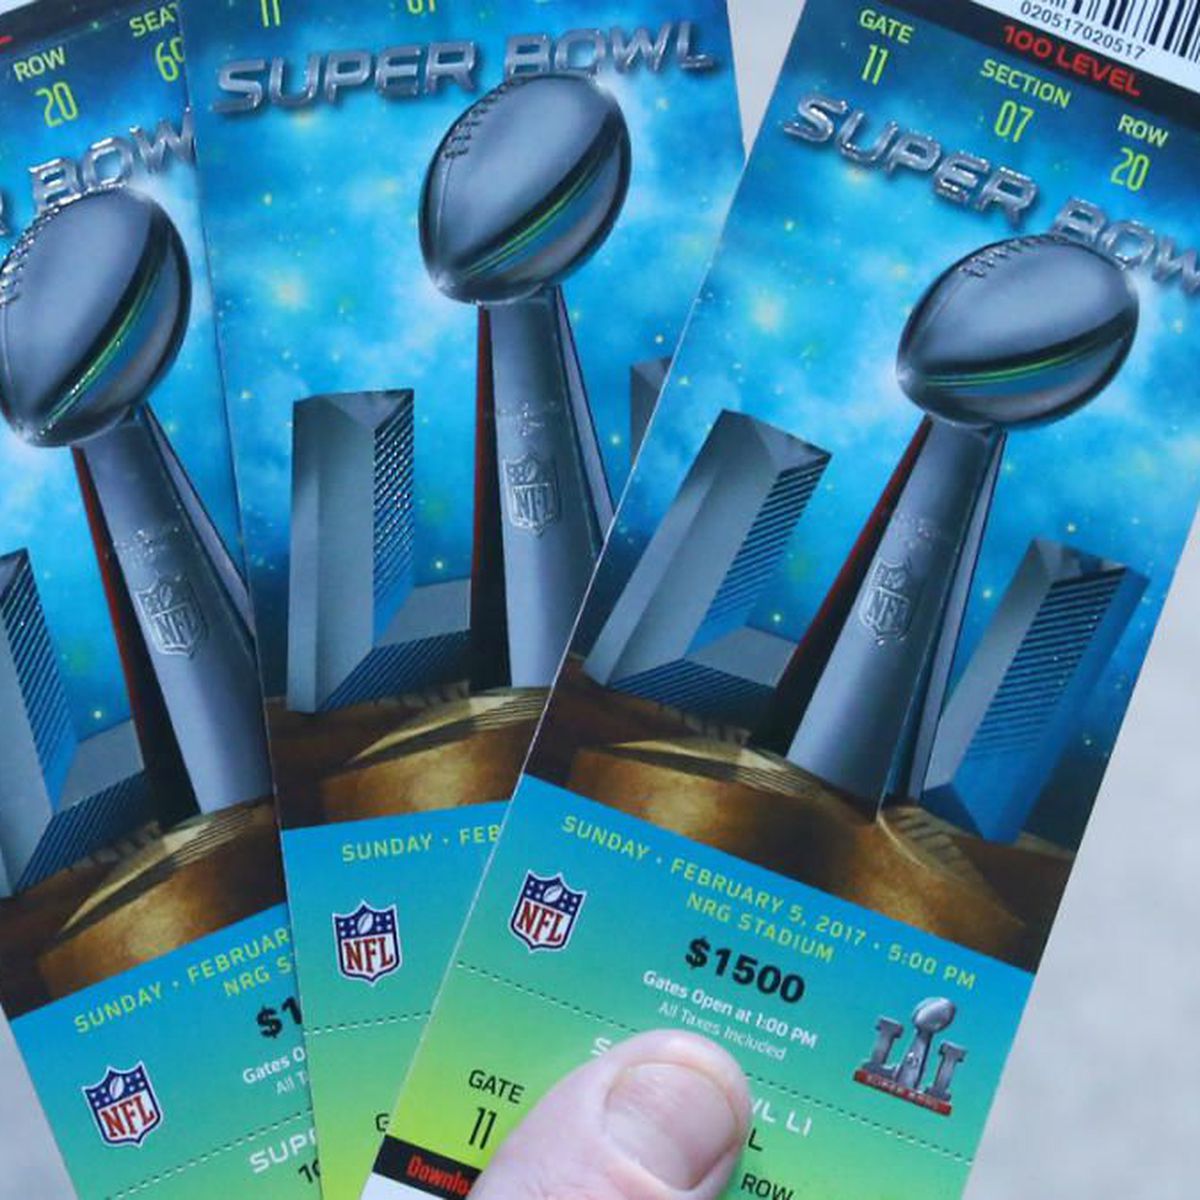 2022 Super Bowl could be 'the most expensive' for fans, TickPick CEO says